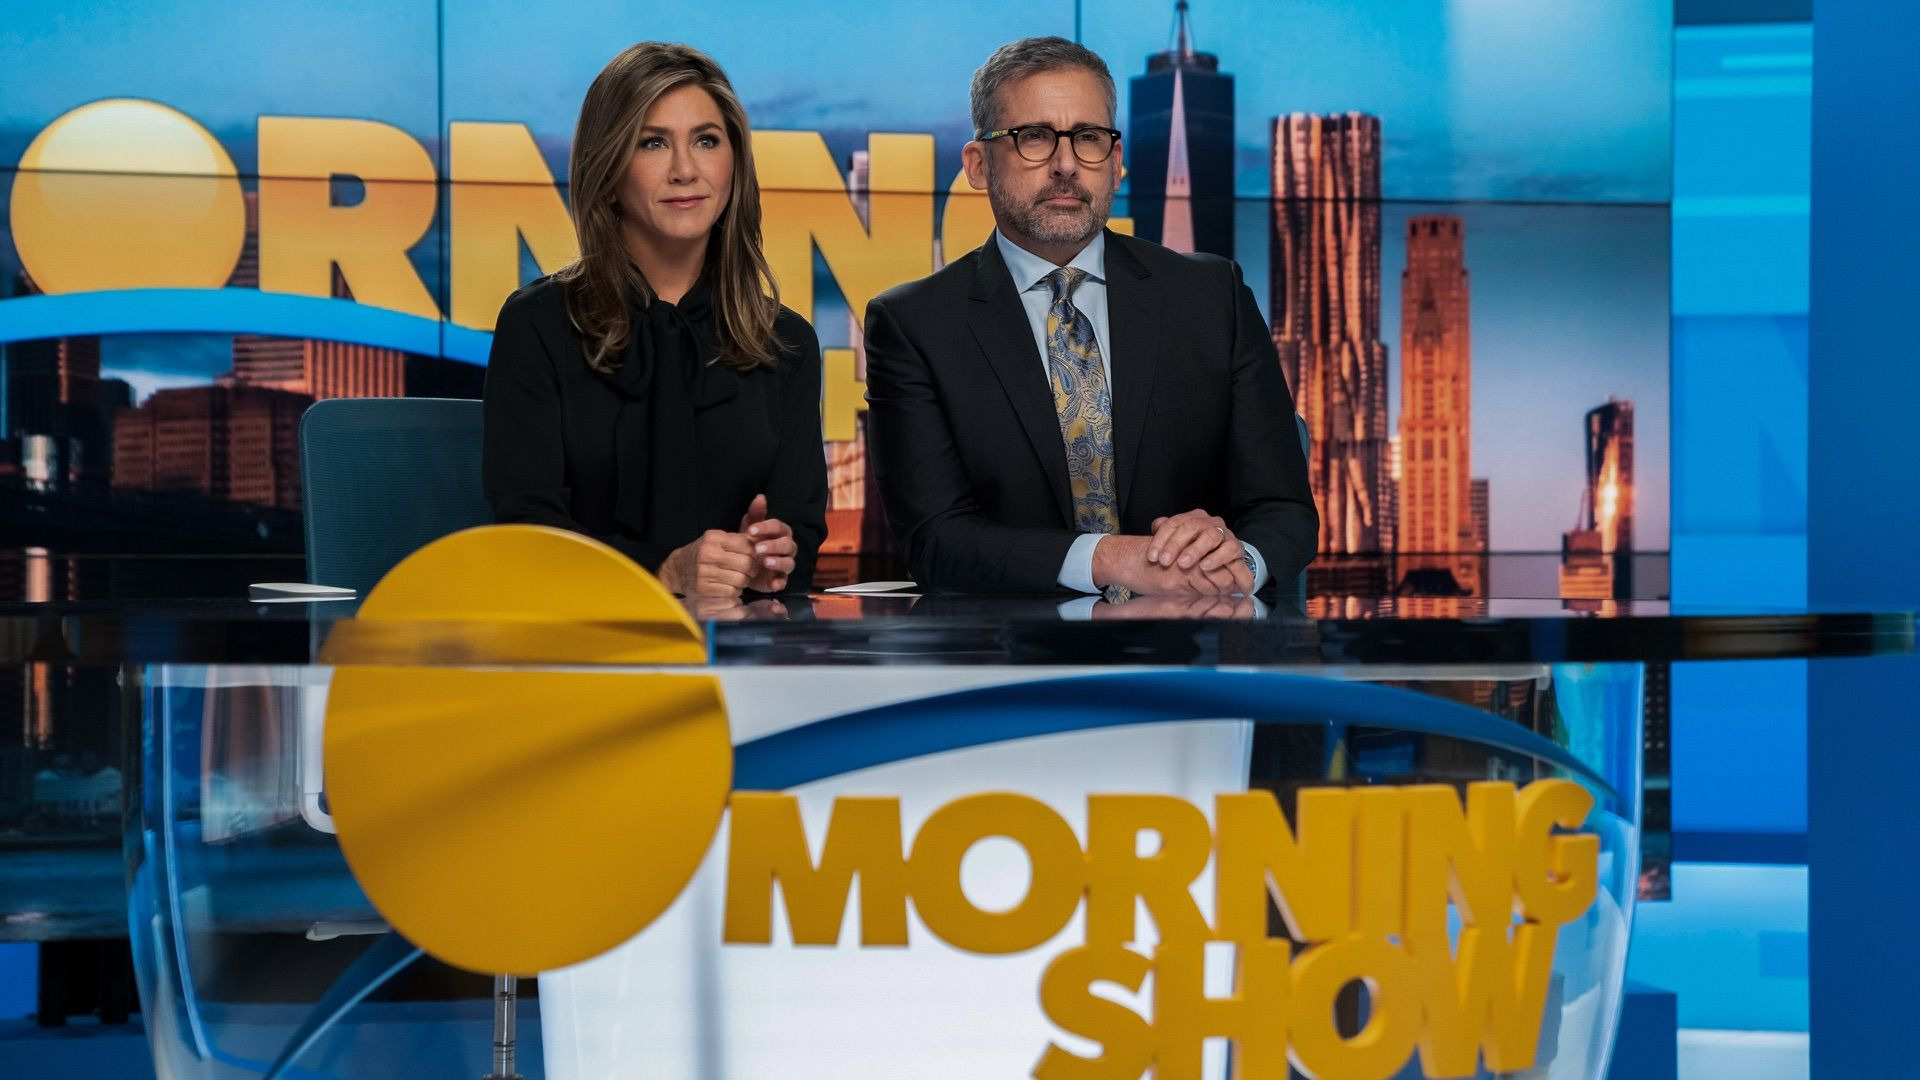 The Morning Show — s01e01 — In the Dark Night of the Soul It's Always 3:30 in the Morning